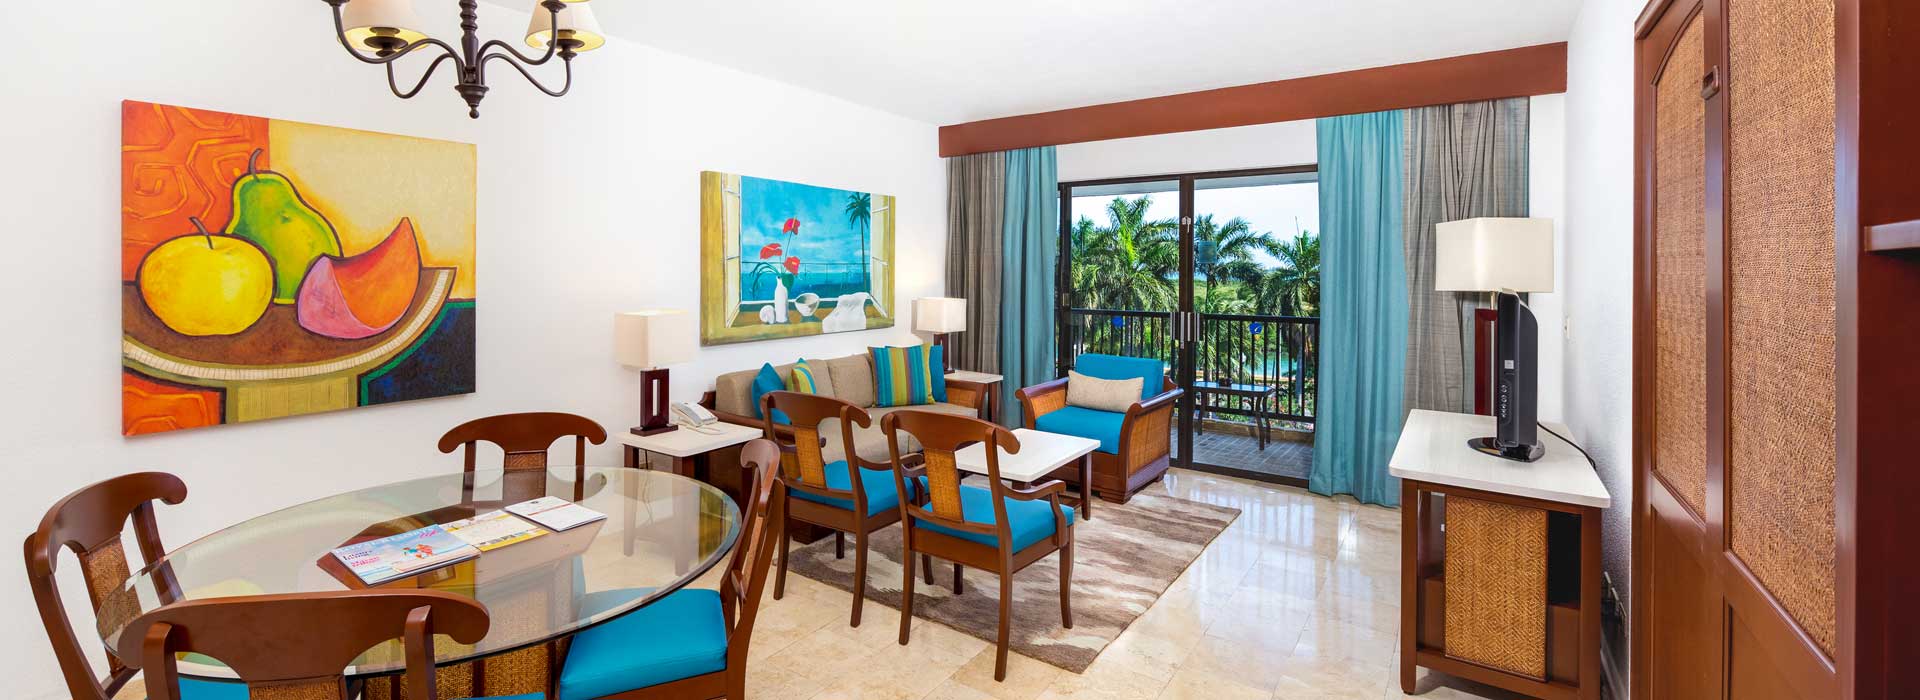 Cancun resort family suite